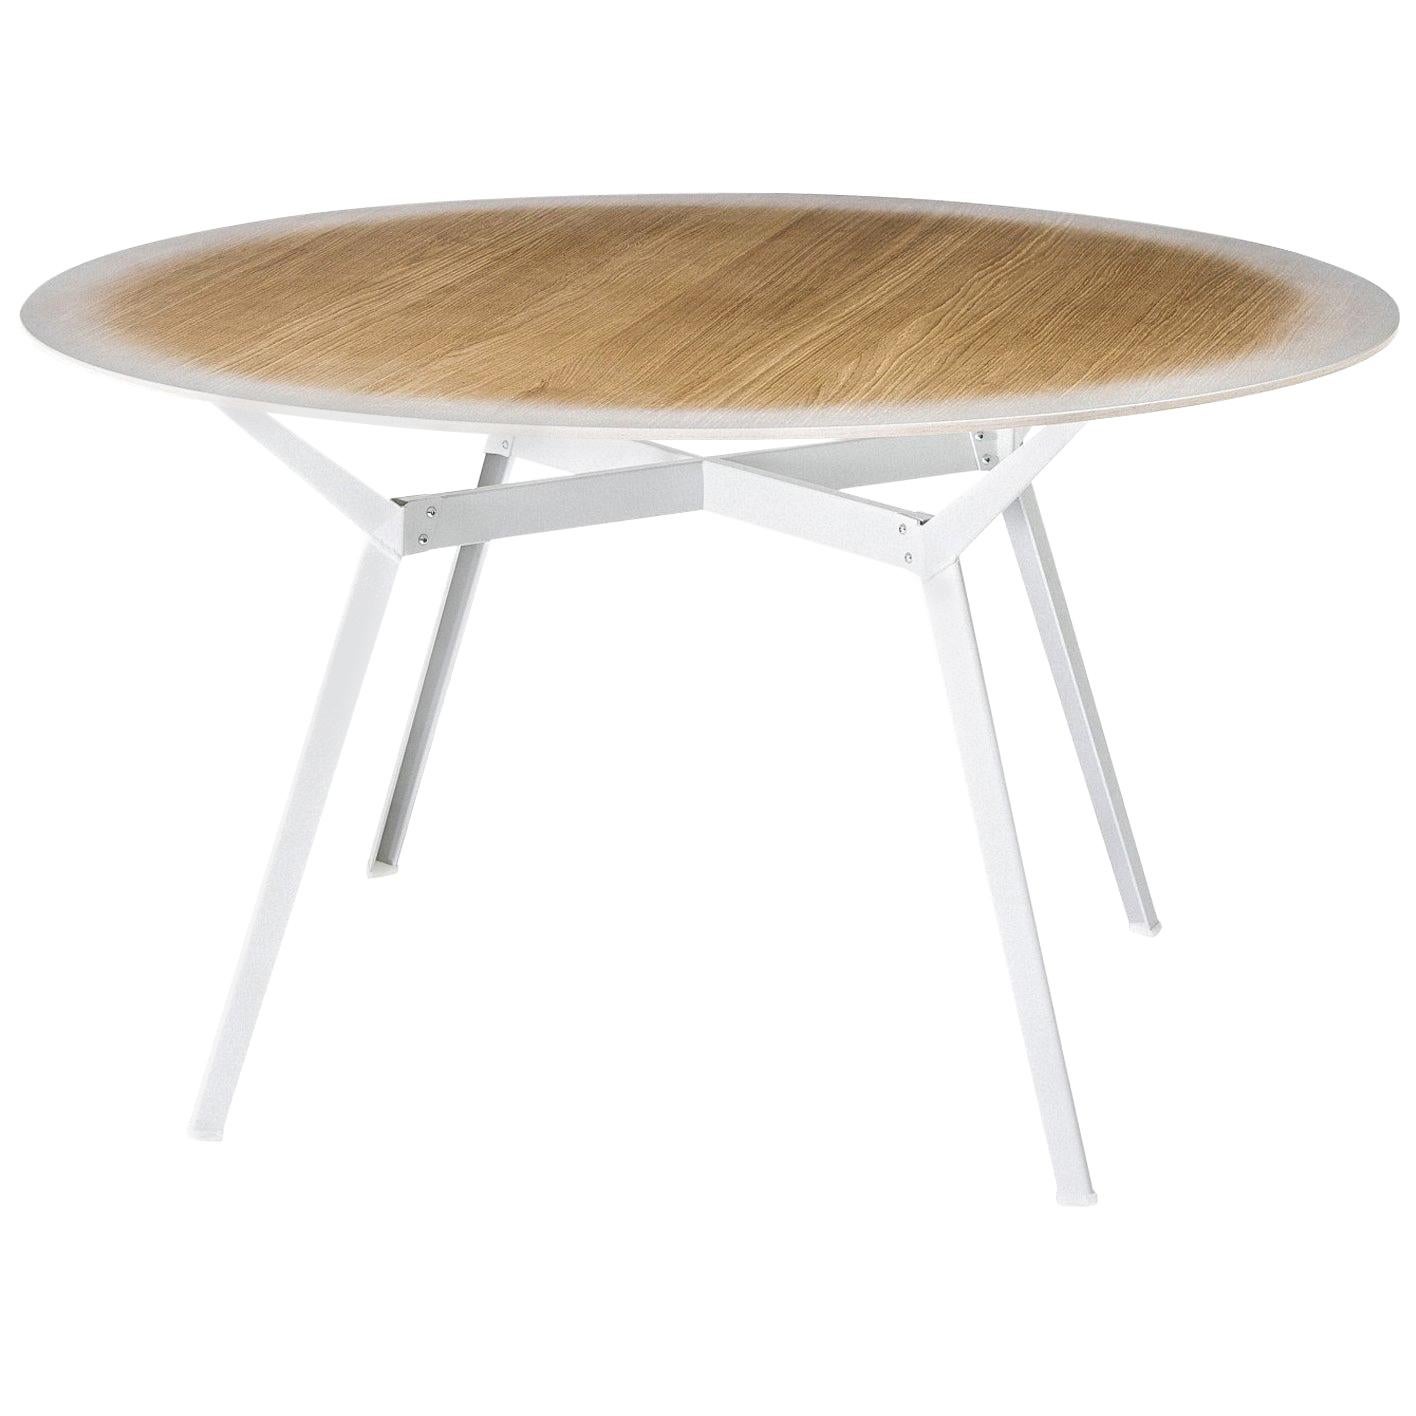 "Pylon Gradient" Round Table with Oak Top and Steel Base by Moroso for Diesel For Sale